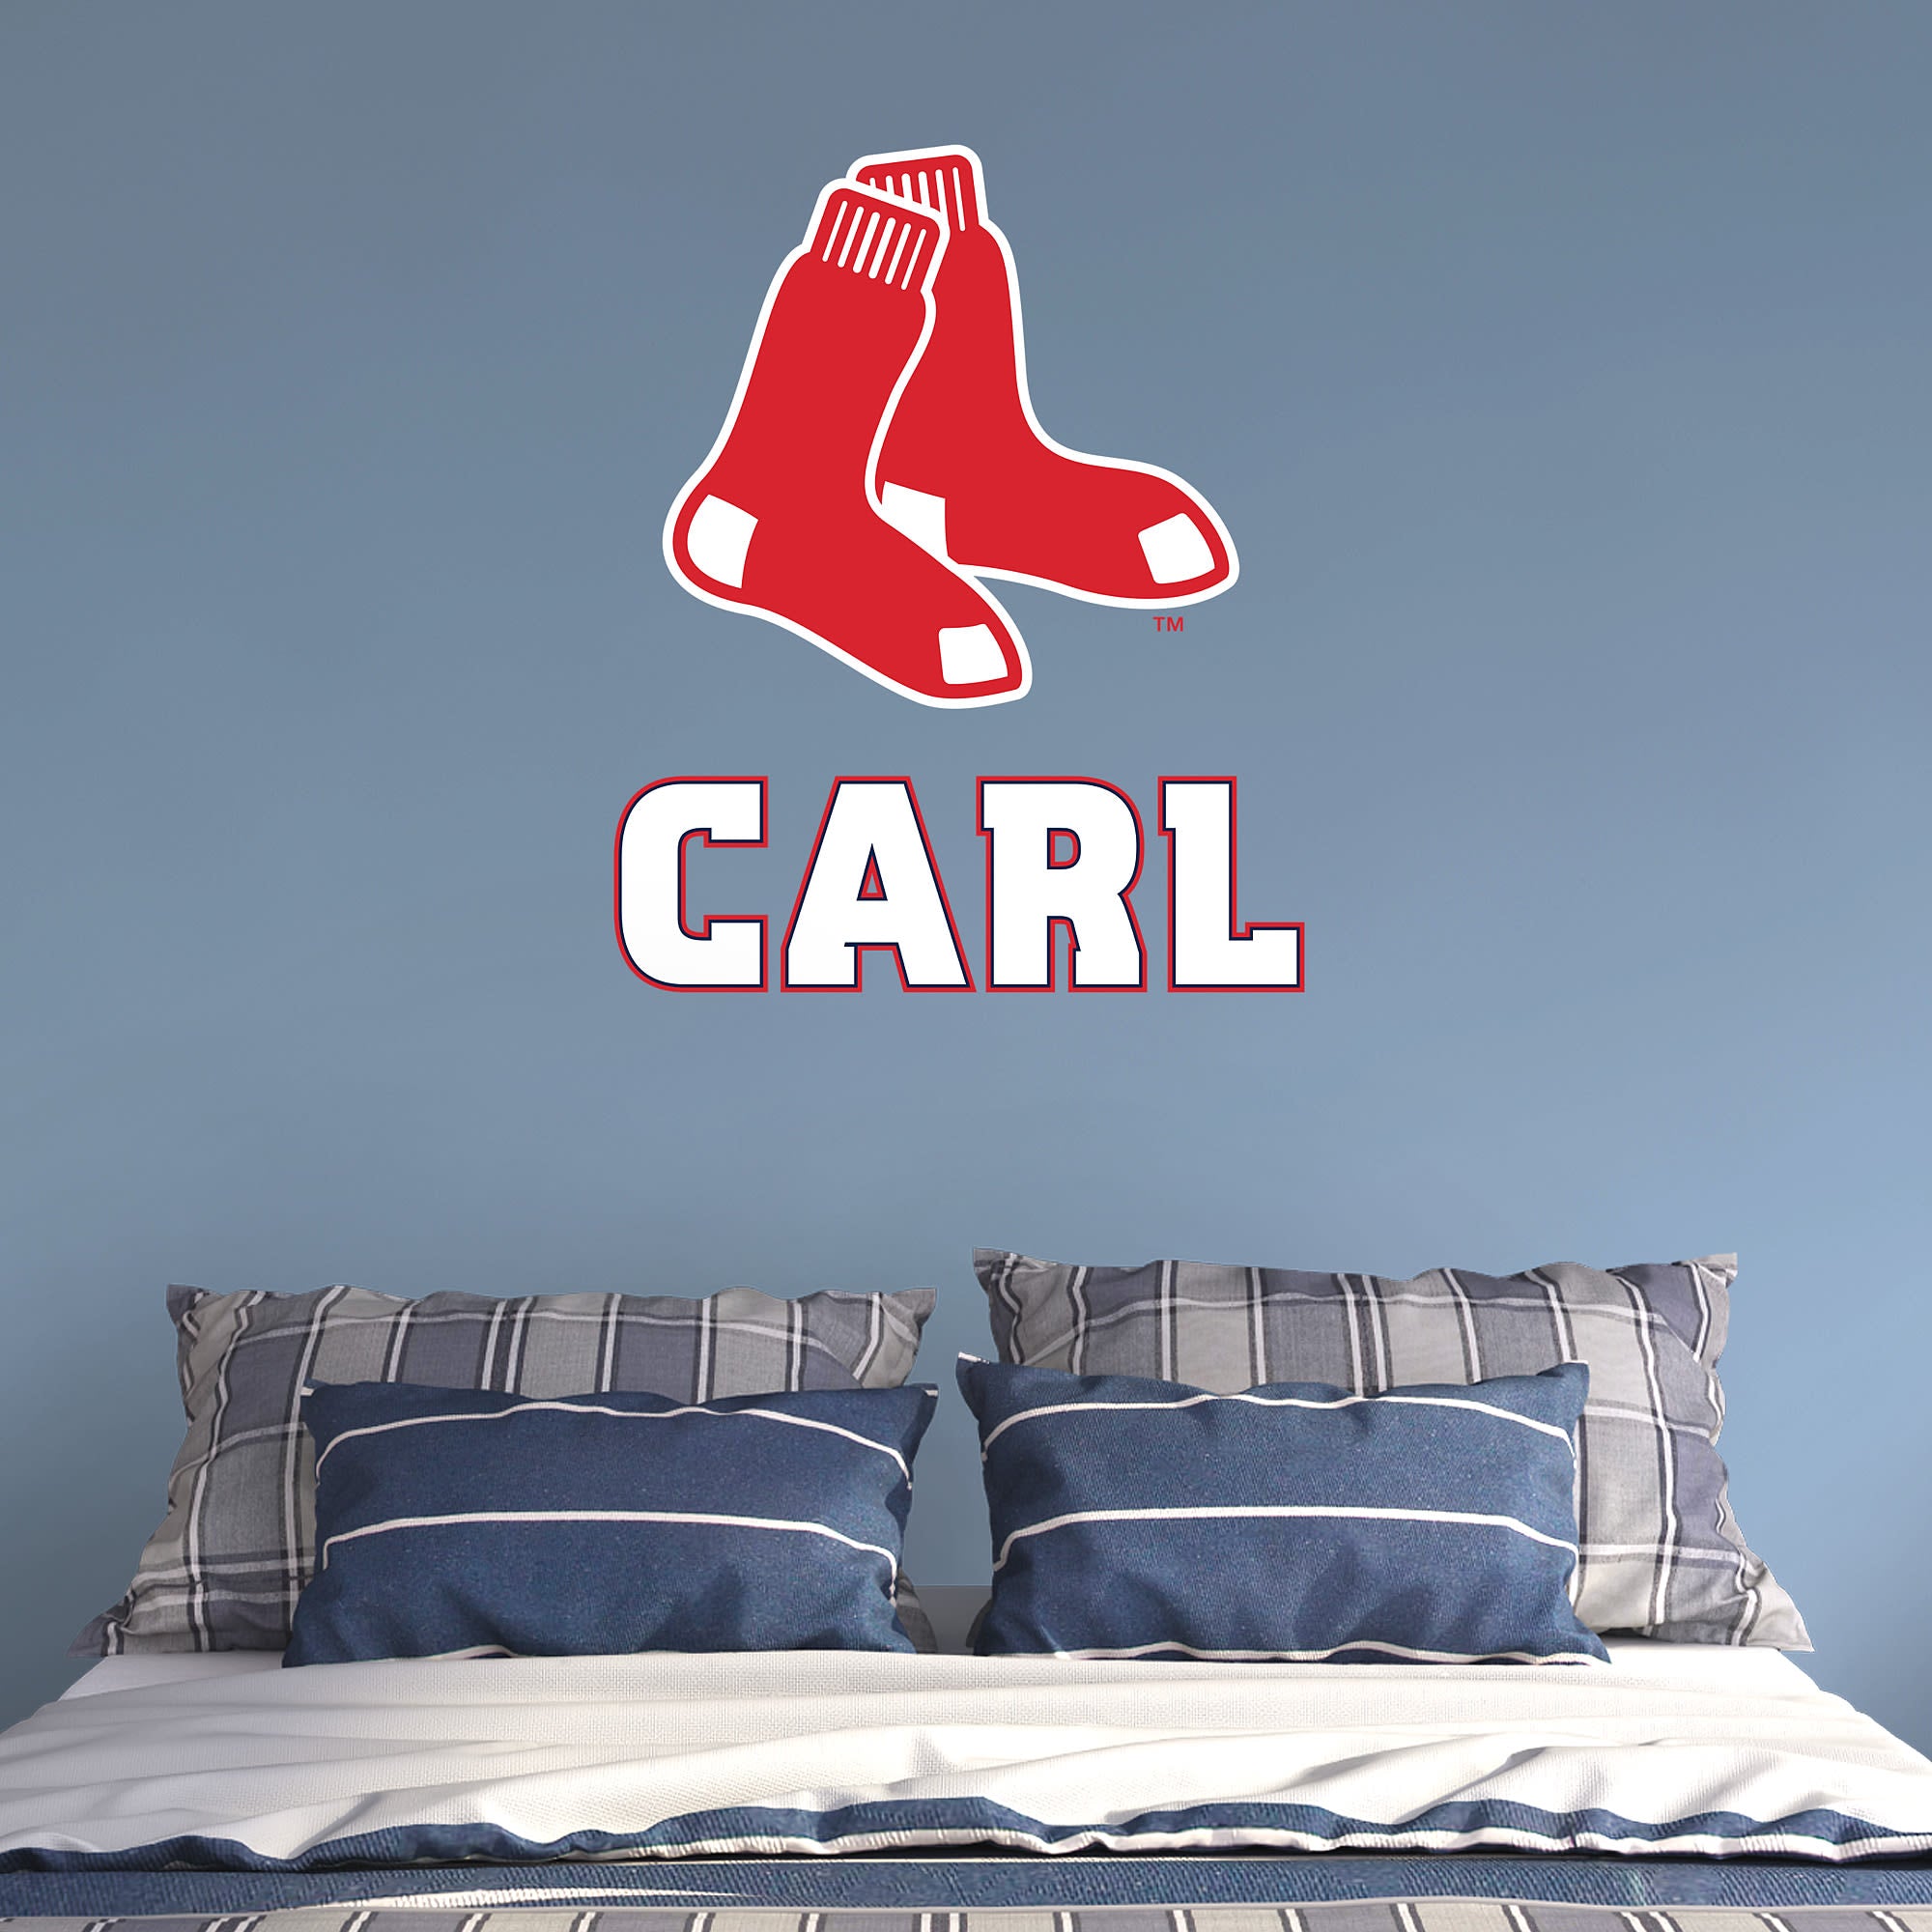 Boston Red Sox: Stacked Personalized Name - Officially Licensed MLB Transfer Decal in White (52"W x 39.5"H) by Fathead | Vinyl